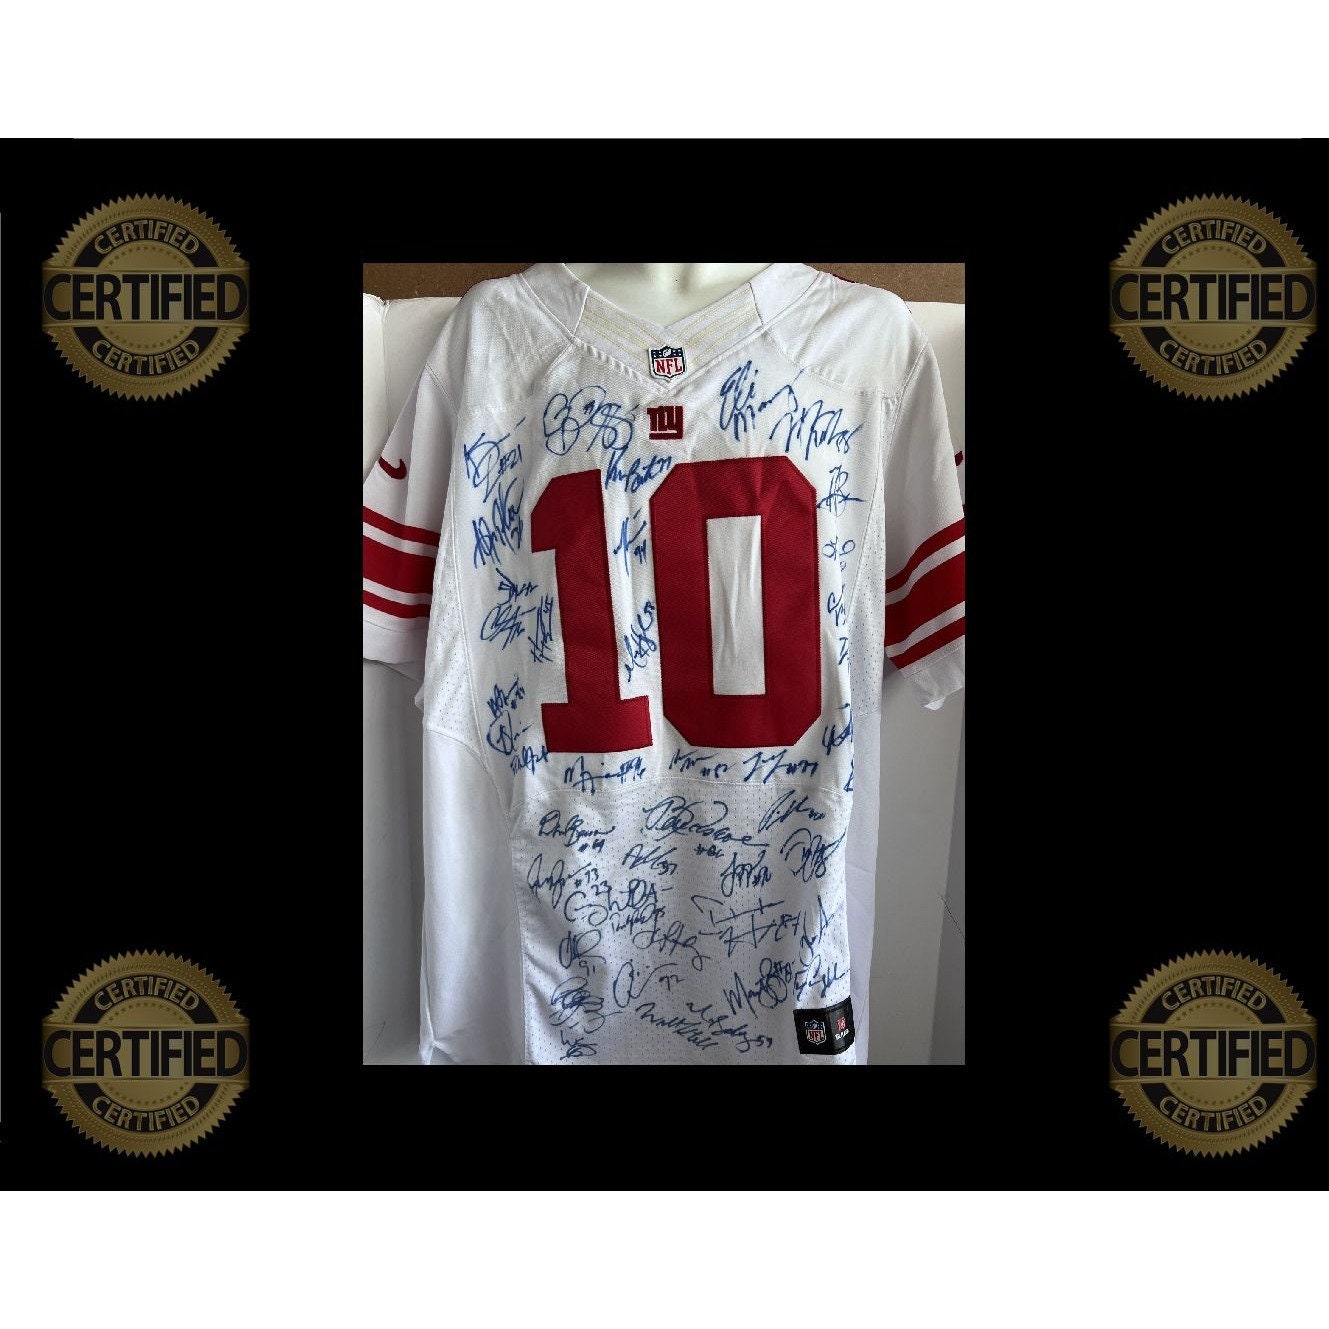 NFL Giants Eli Manning Super Bowl XLII ReplicaWite Jersey 